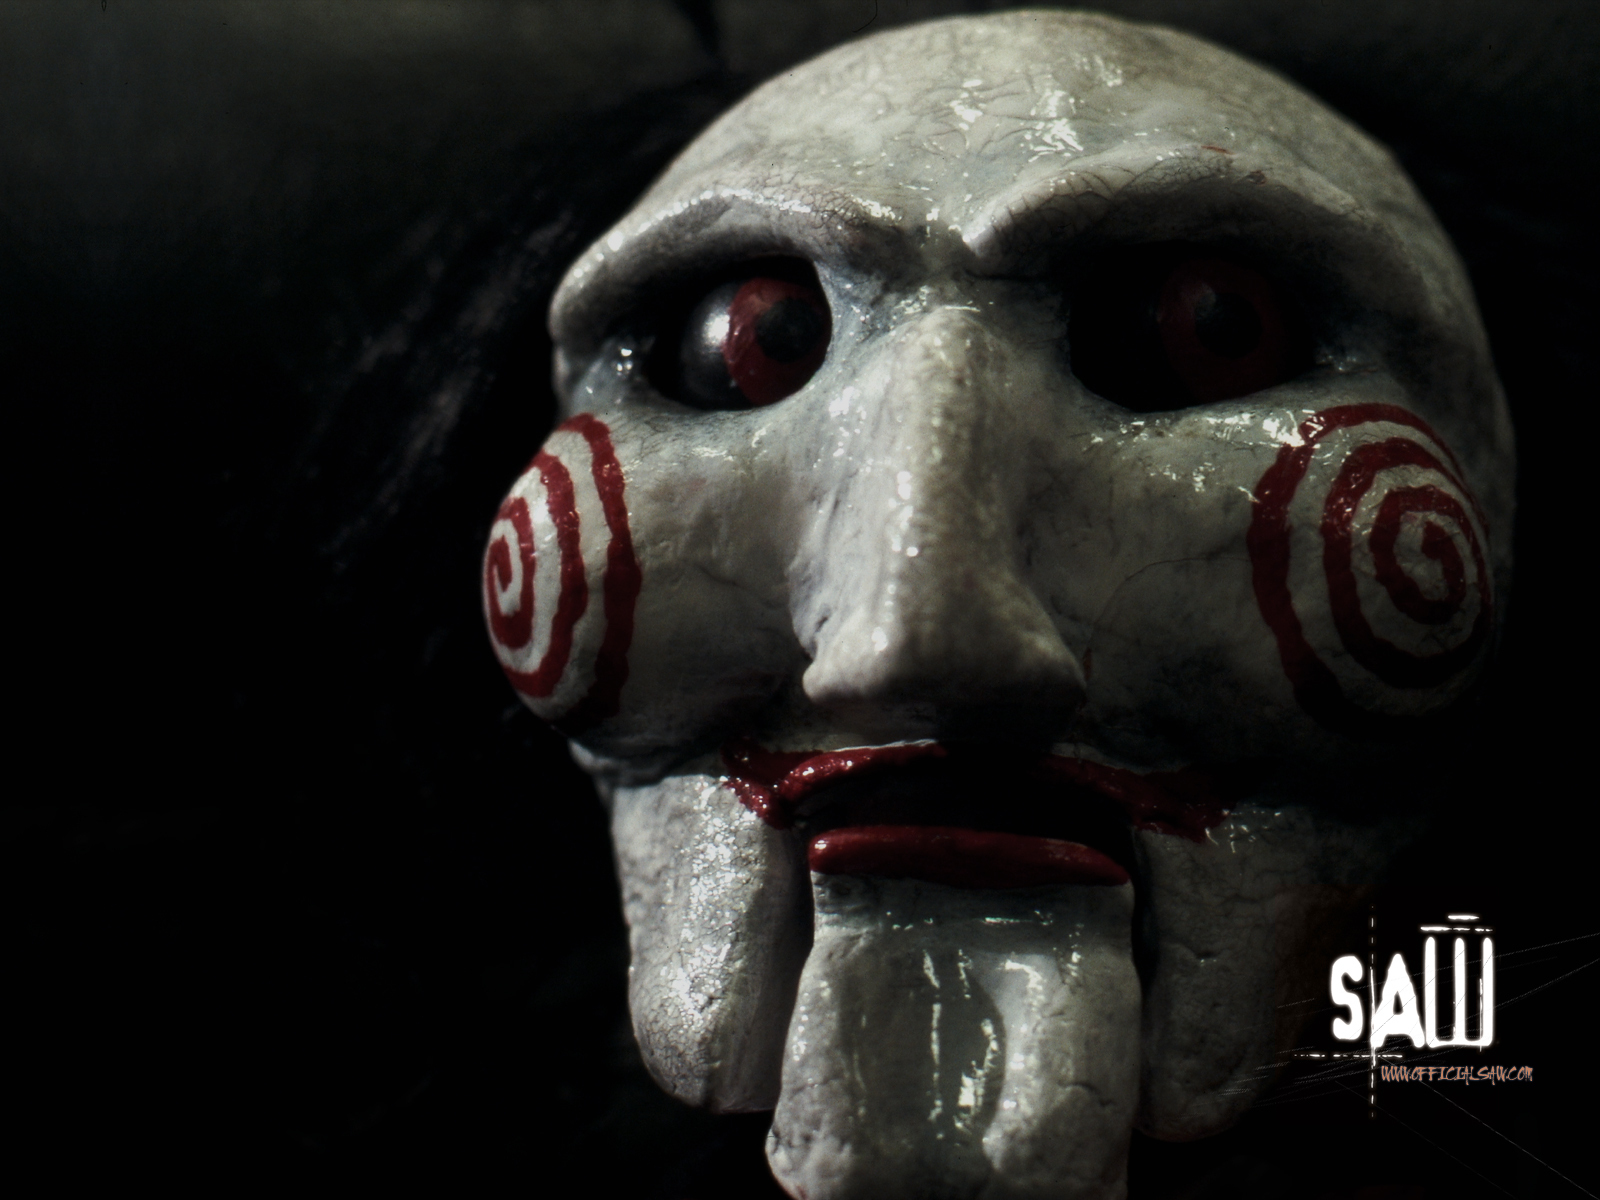 Saw I Want To Play A Game Horror Movies Wallpaper